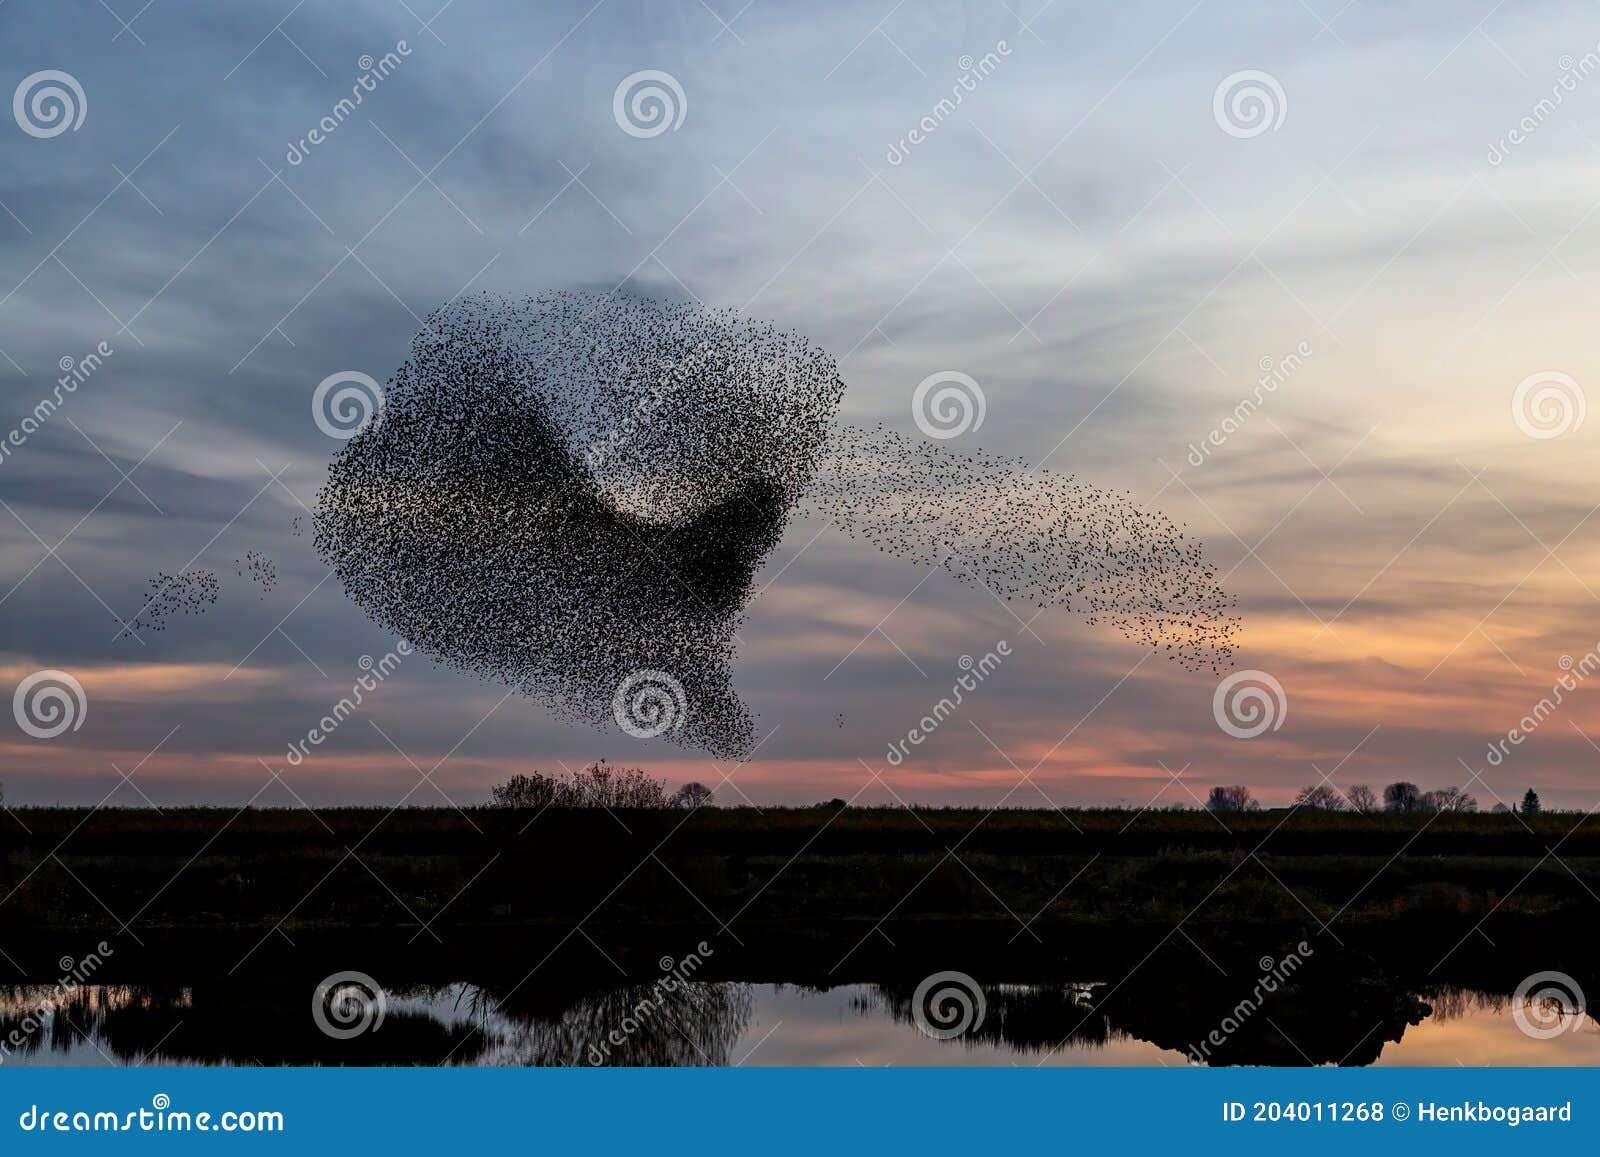 starling murmuration at sunset in the netherlands